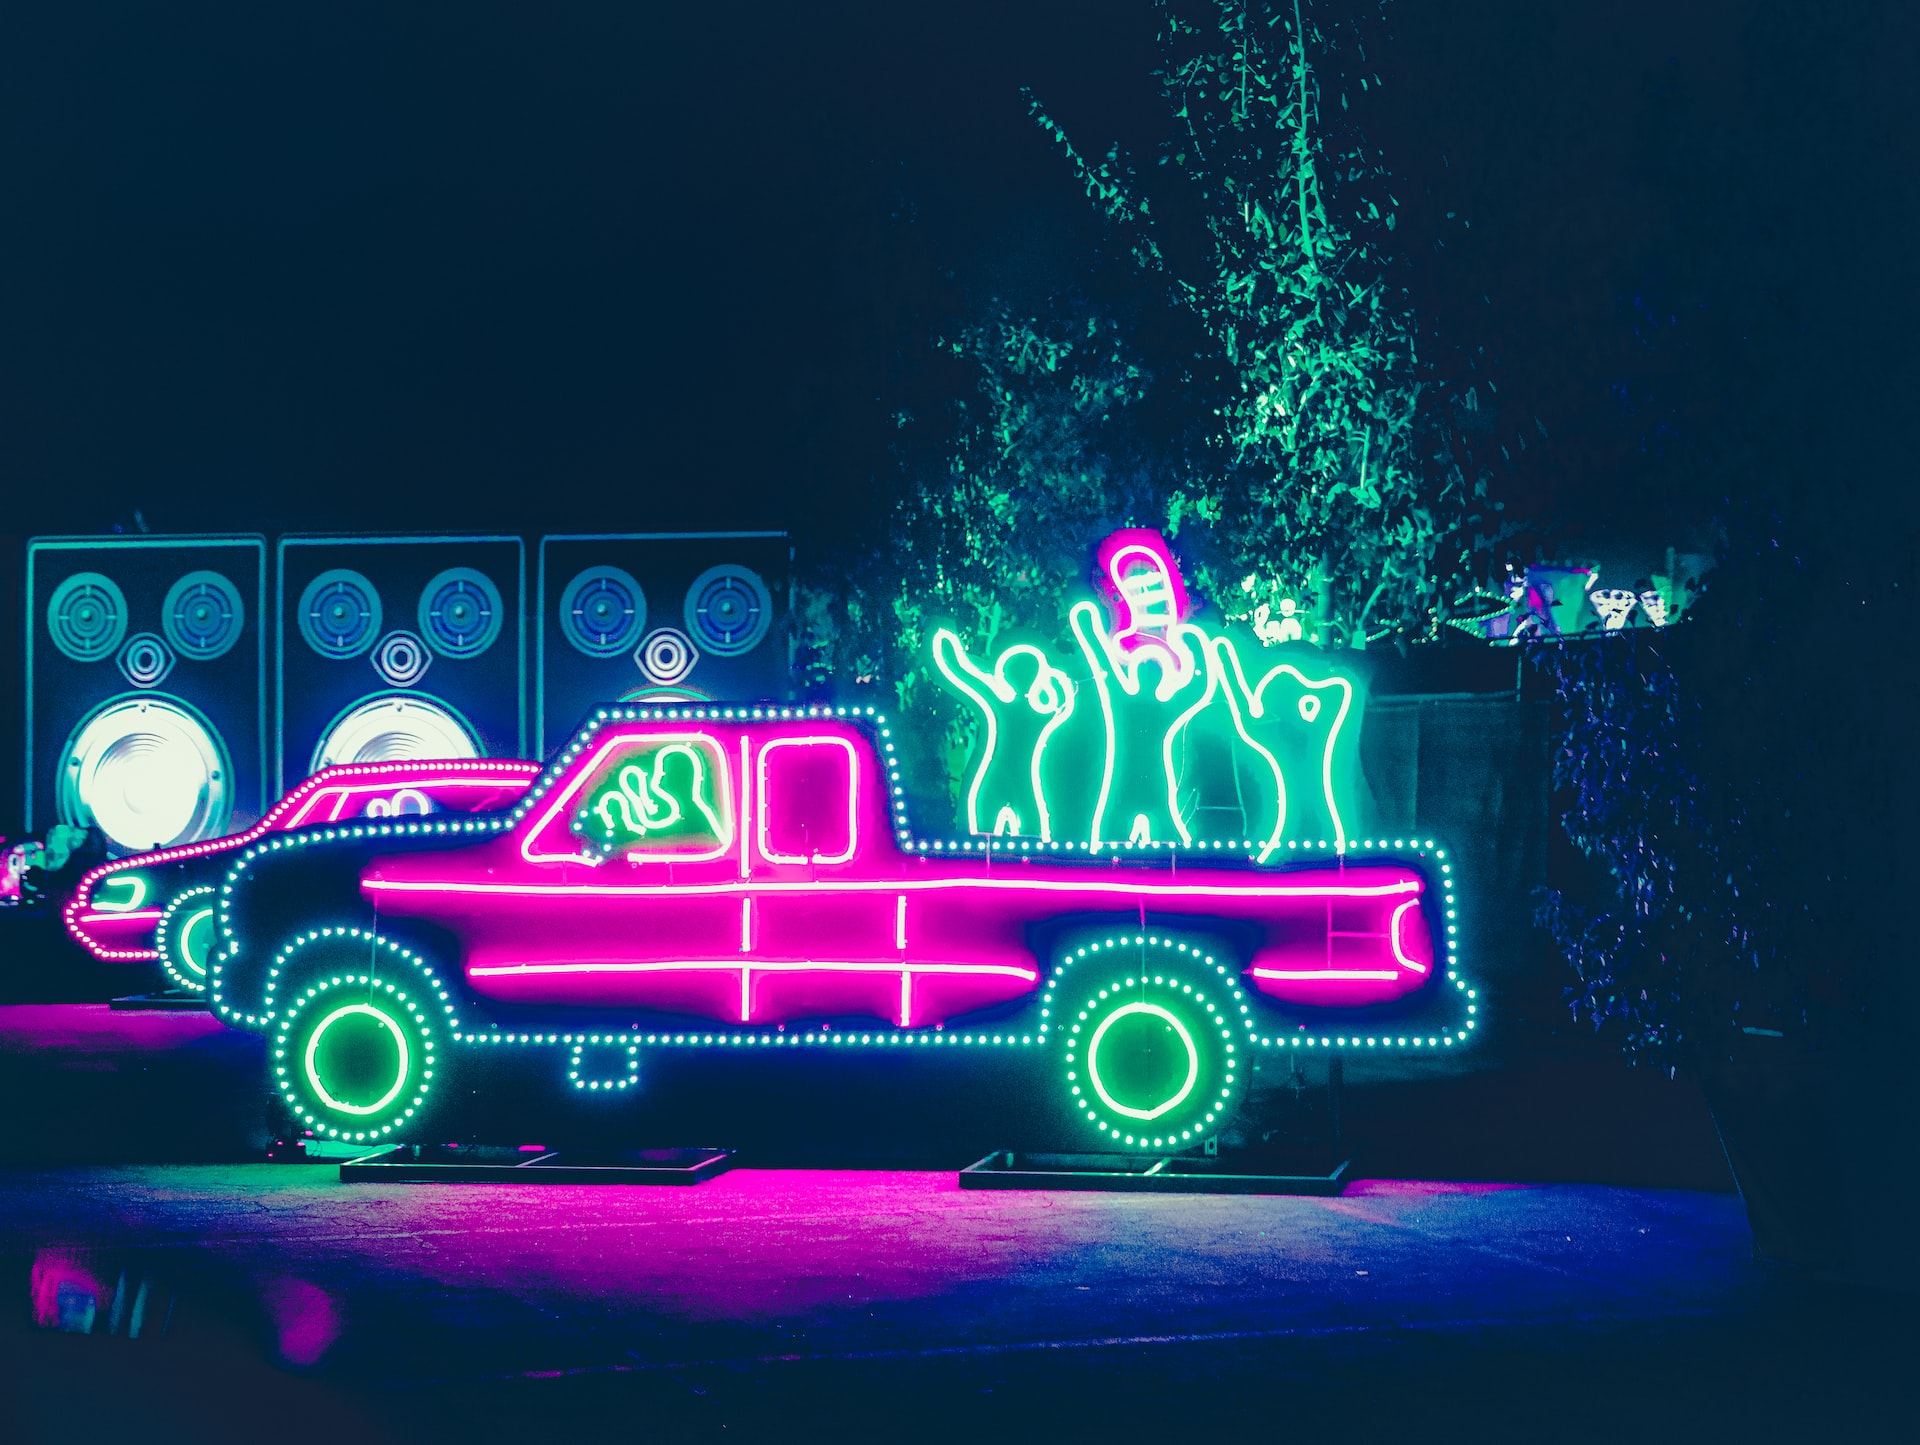 A lit-up truck at the race track during Christmas.